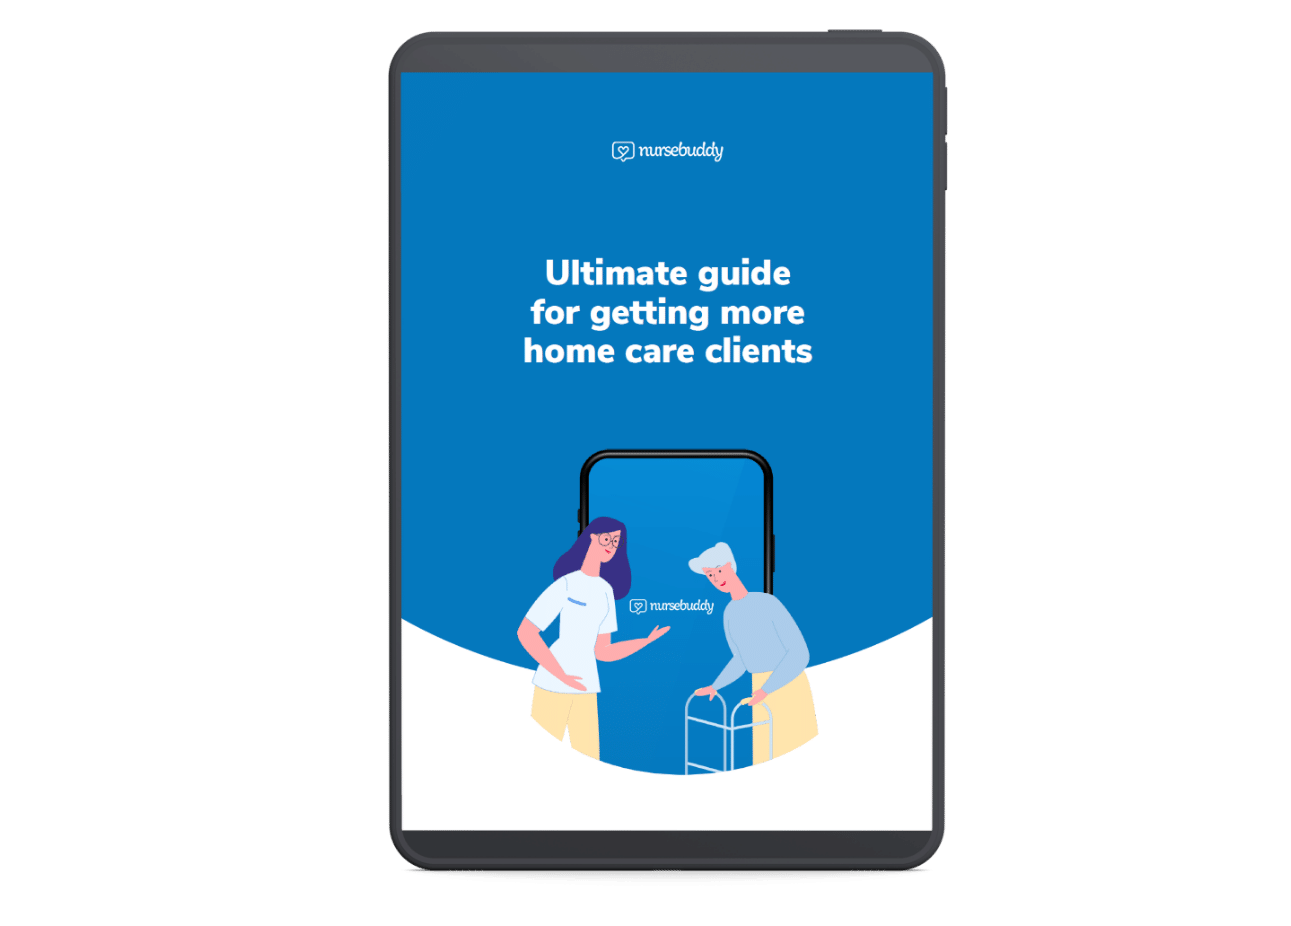 The ultimate guide to getting more homecare clients, from Nursebuddy